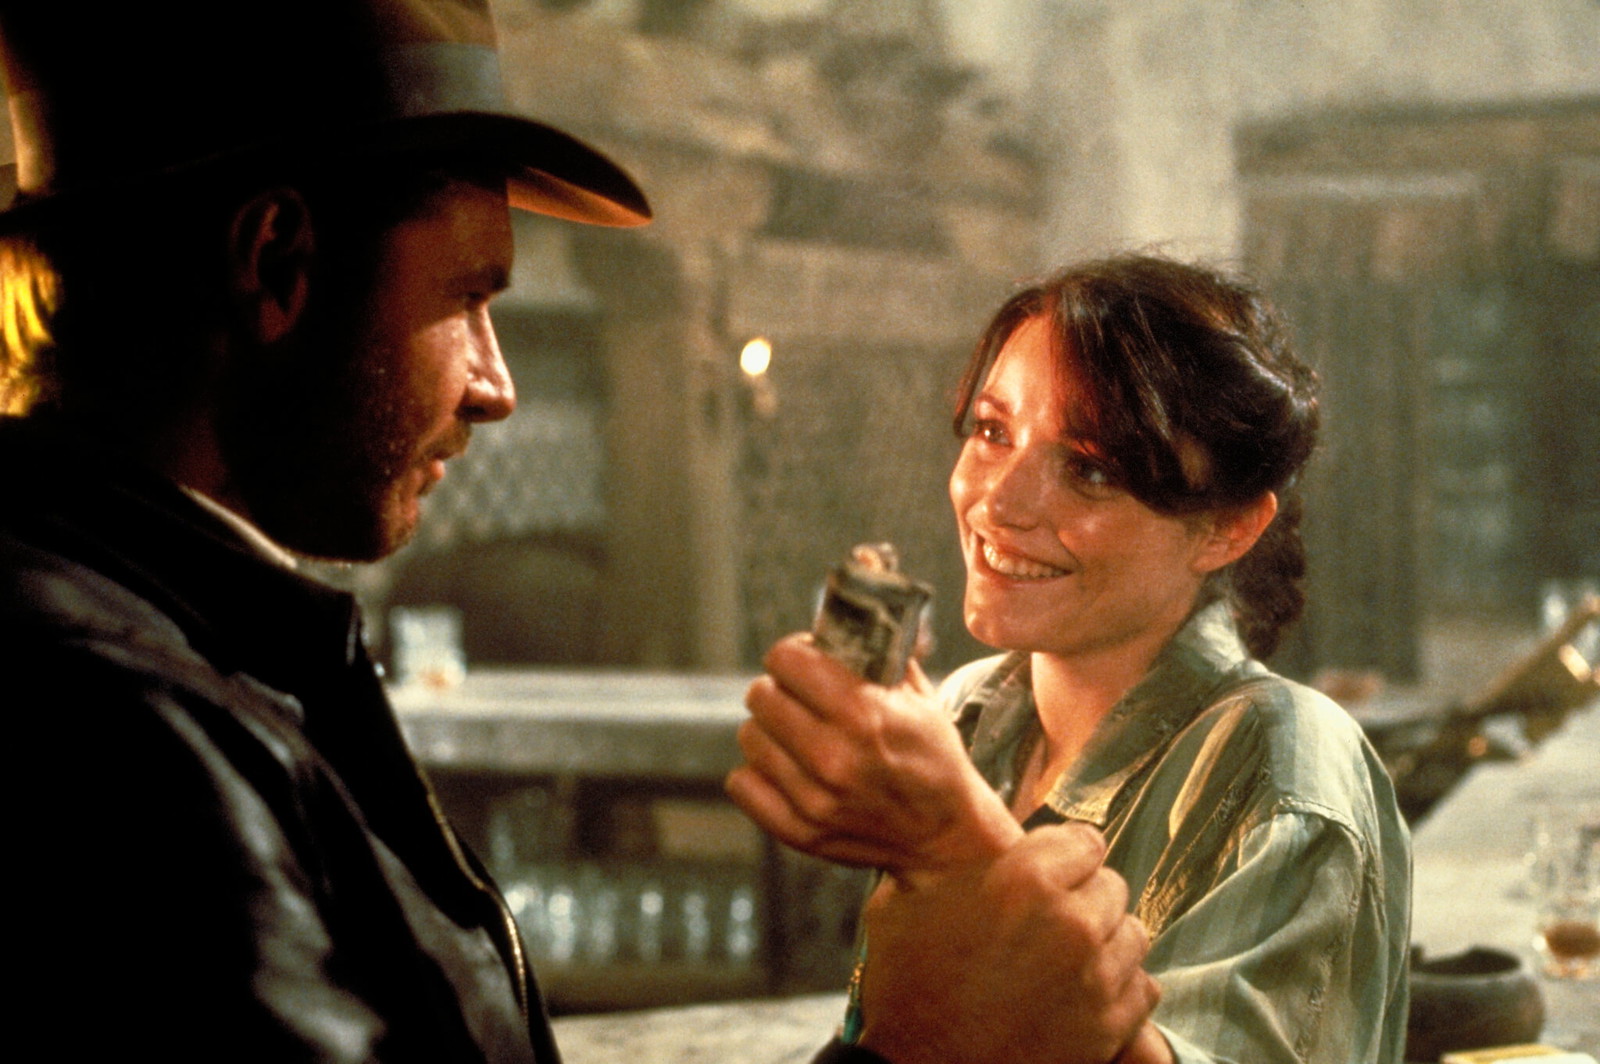 Harrison Ford and Karen Allen in a still from Indiana Jones and Raiders of the Lost Ark